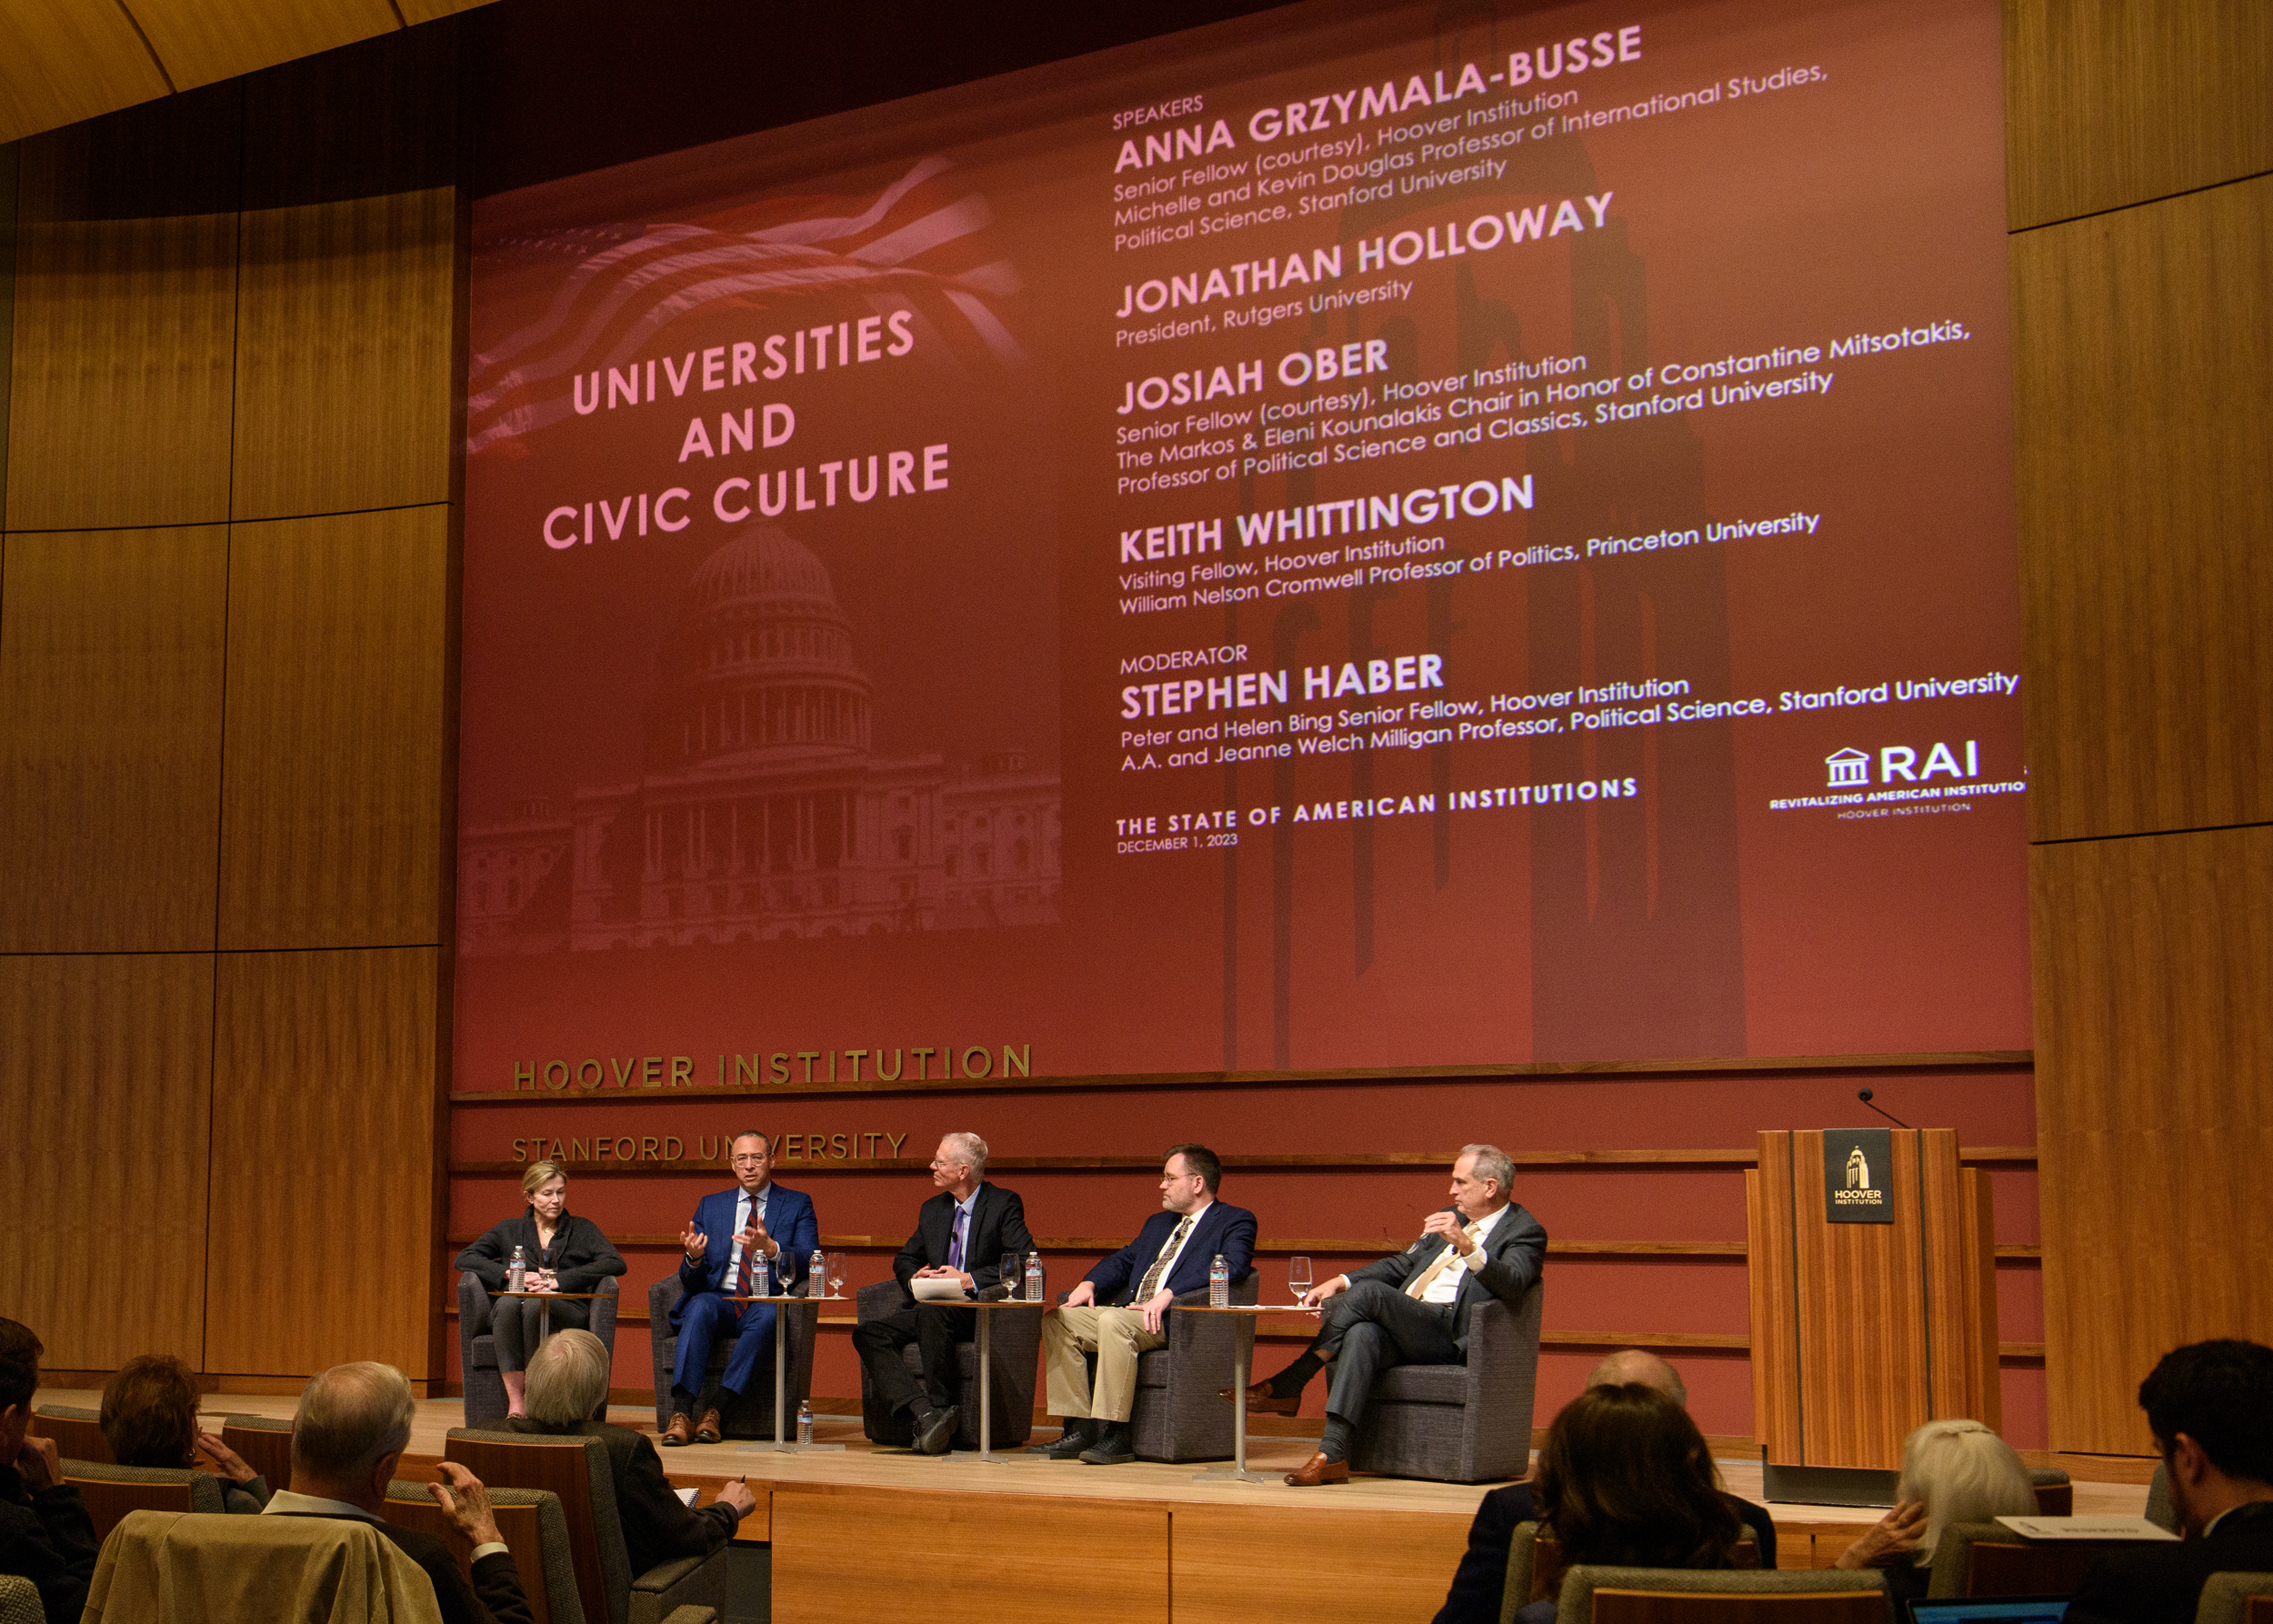 A panel convened on universities and civic culture. Left to right: Anna Gryzmala-Busse, Jonathan Holloway, Keith Whittington, and Stephen Haber. (Patrick Beaudouin, 2023)